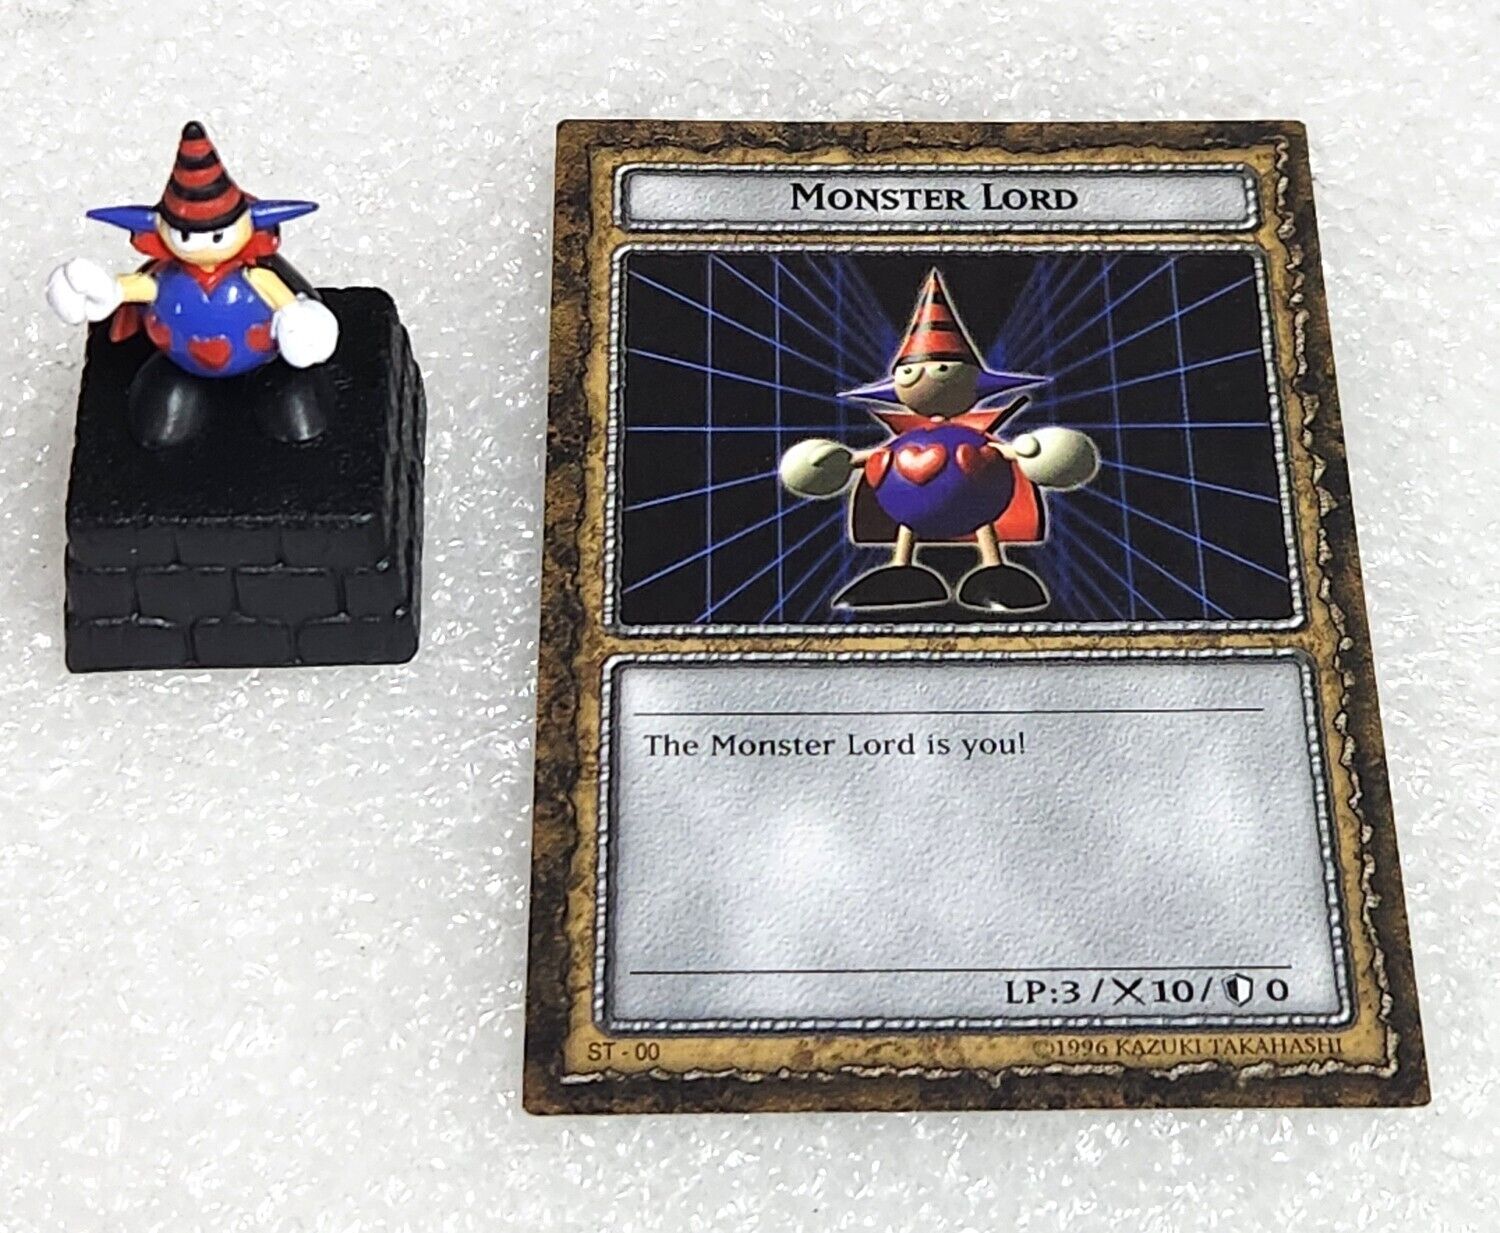 2001 Yu-Gi-Oh Dungeon Dice Monsters Monster Lord